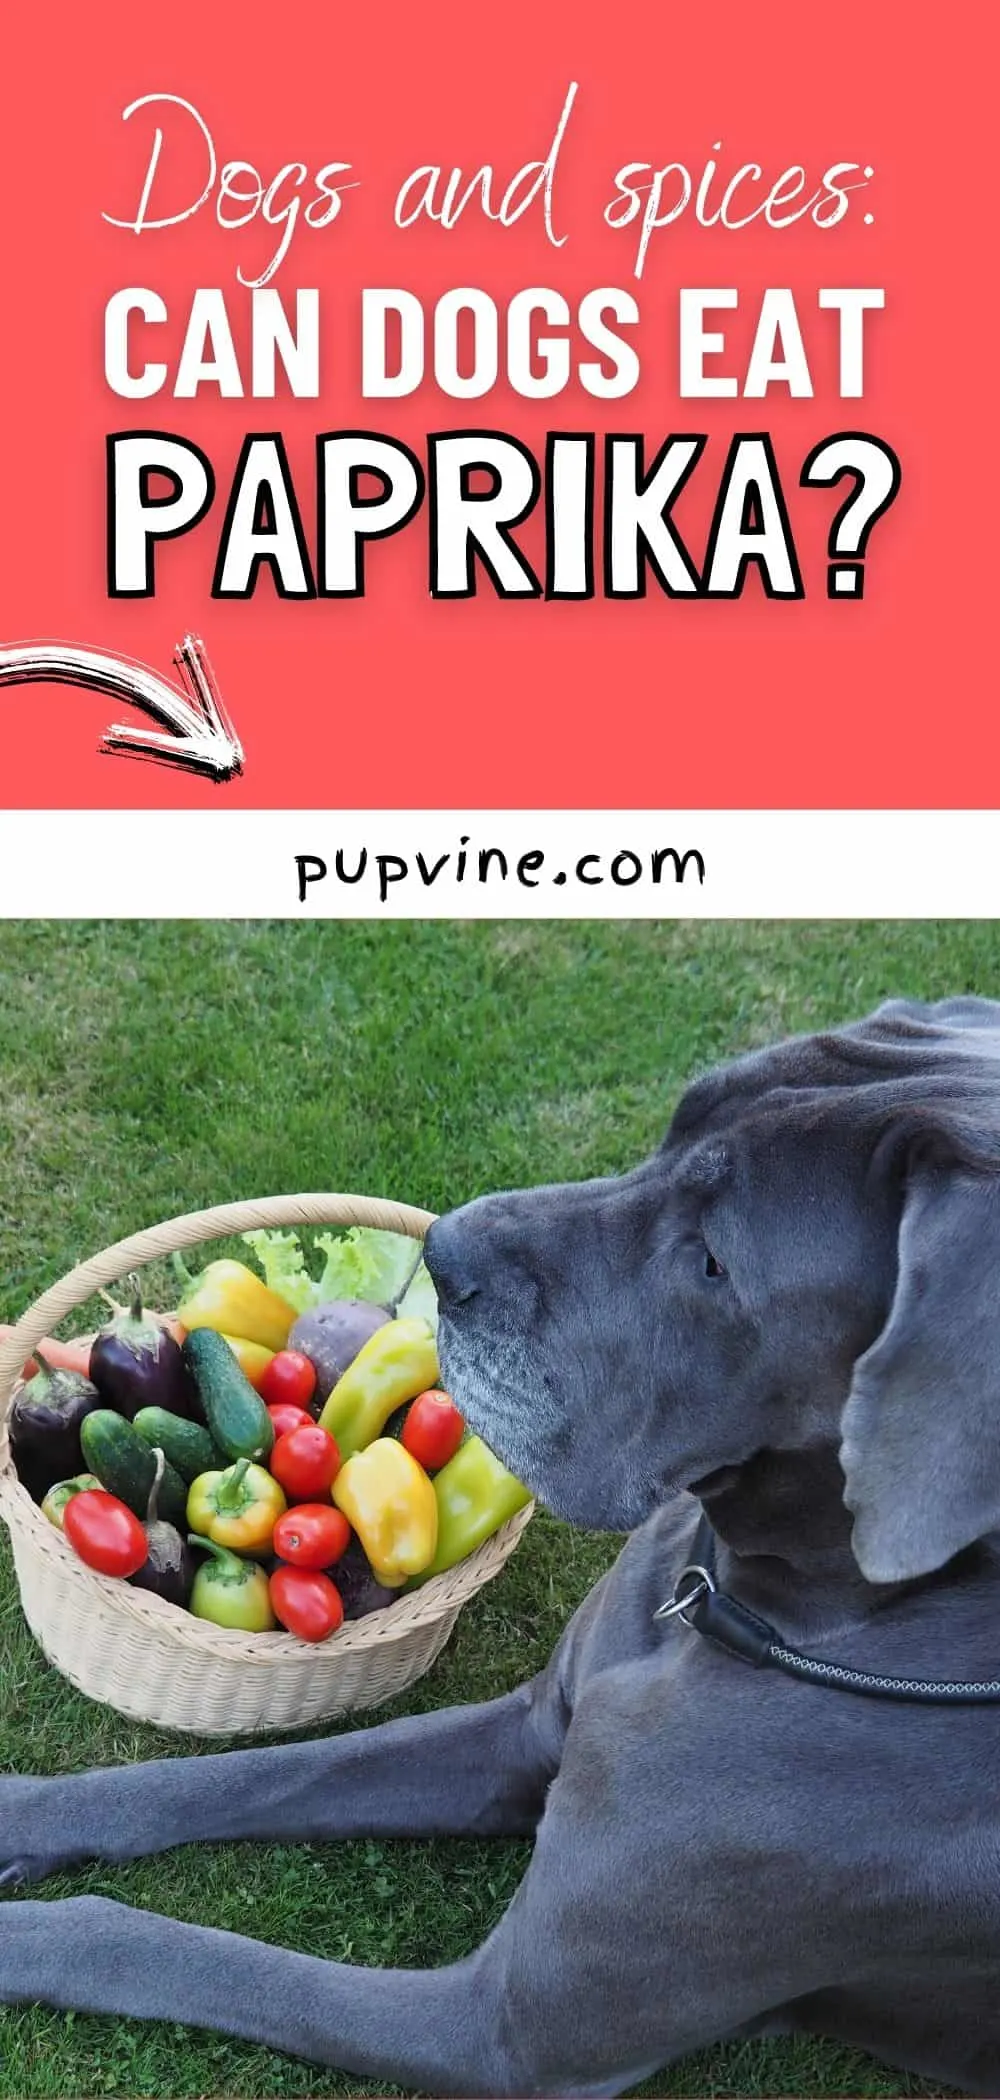 Dogs and spices: Can dogs eat paprika?